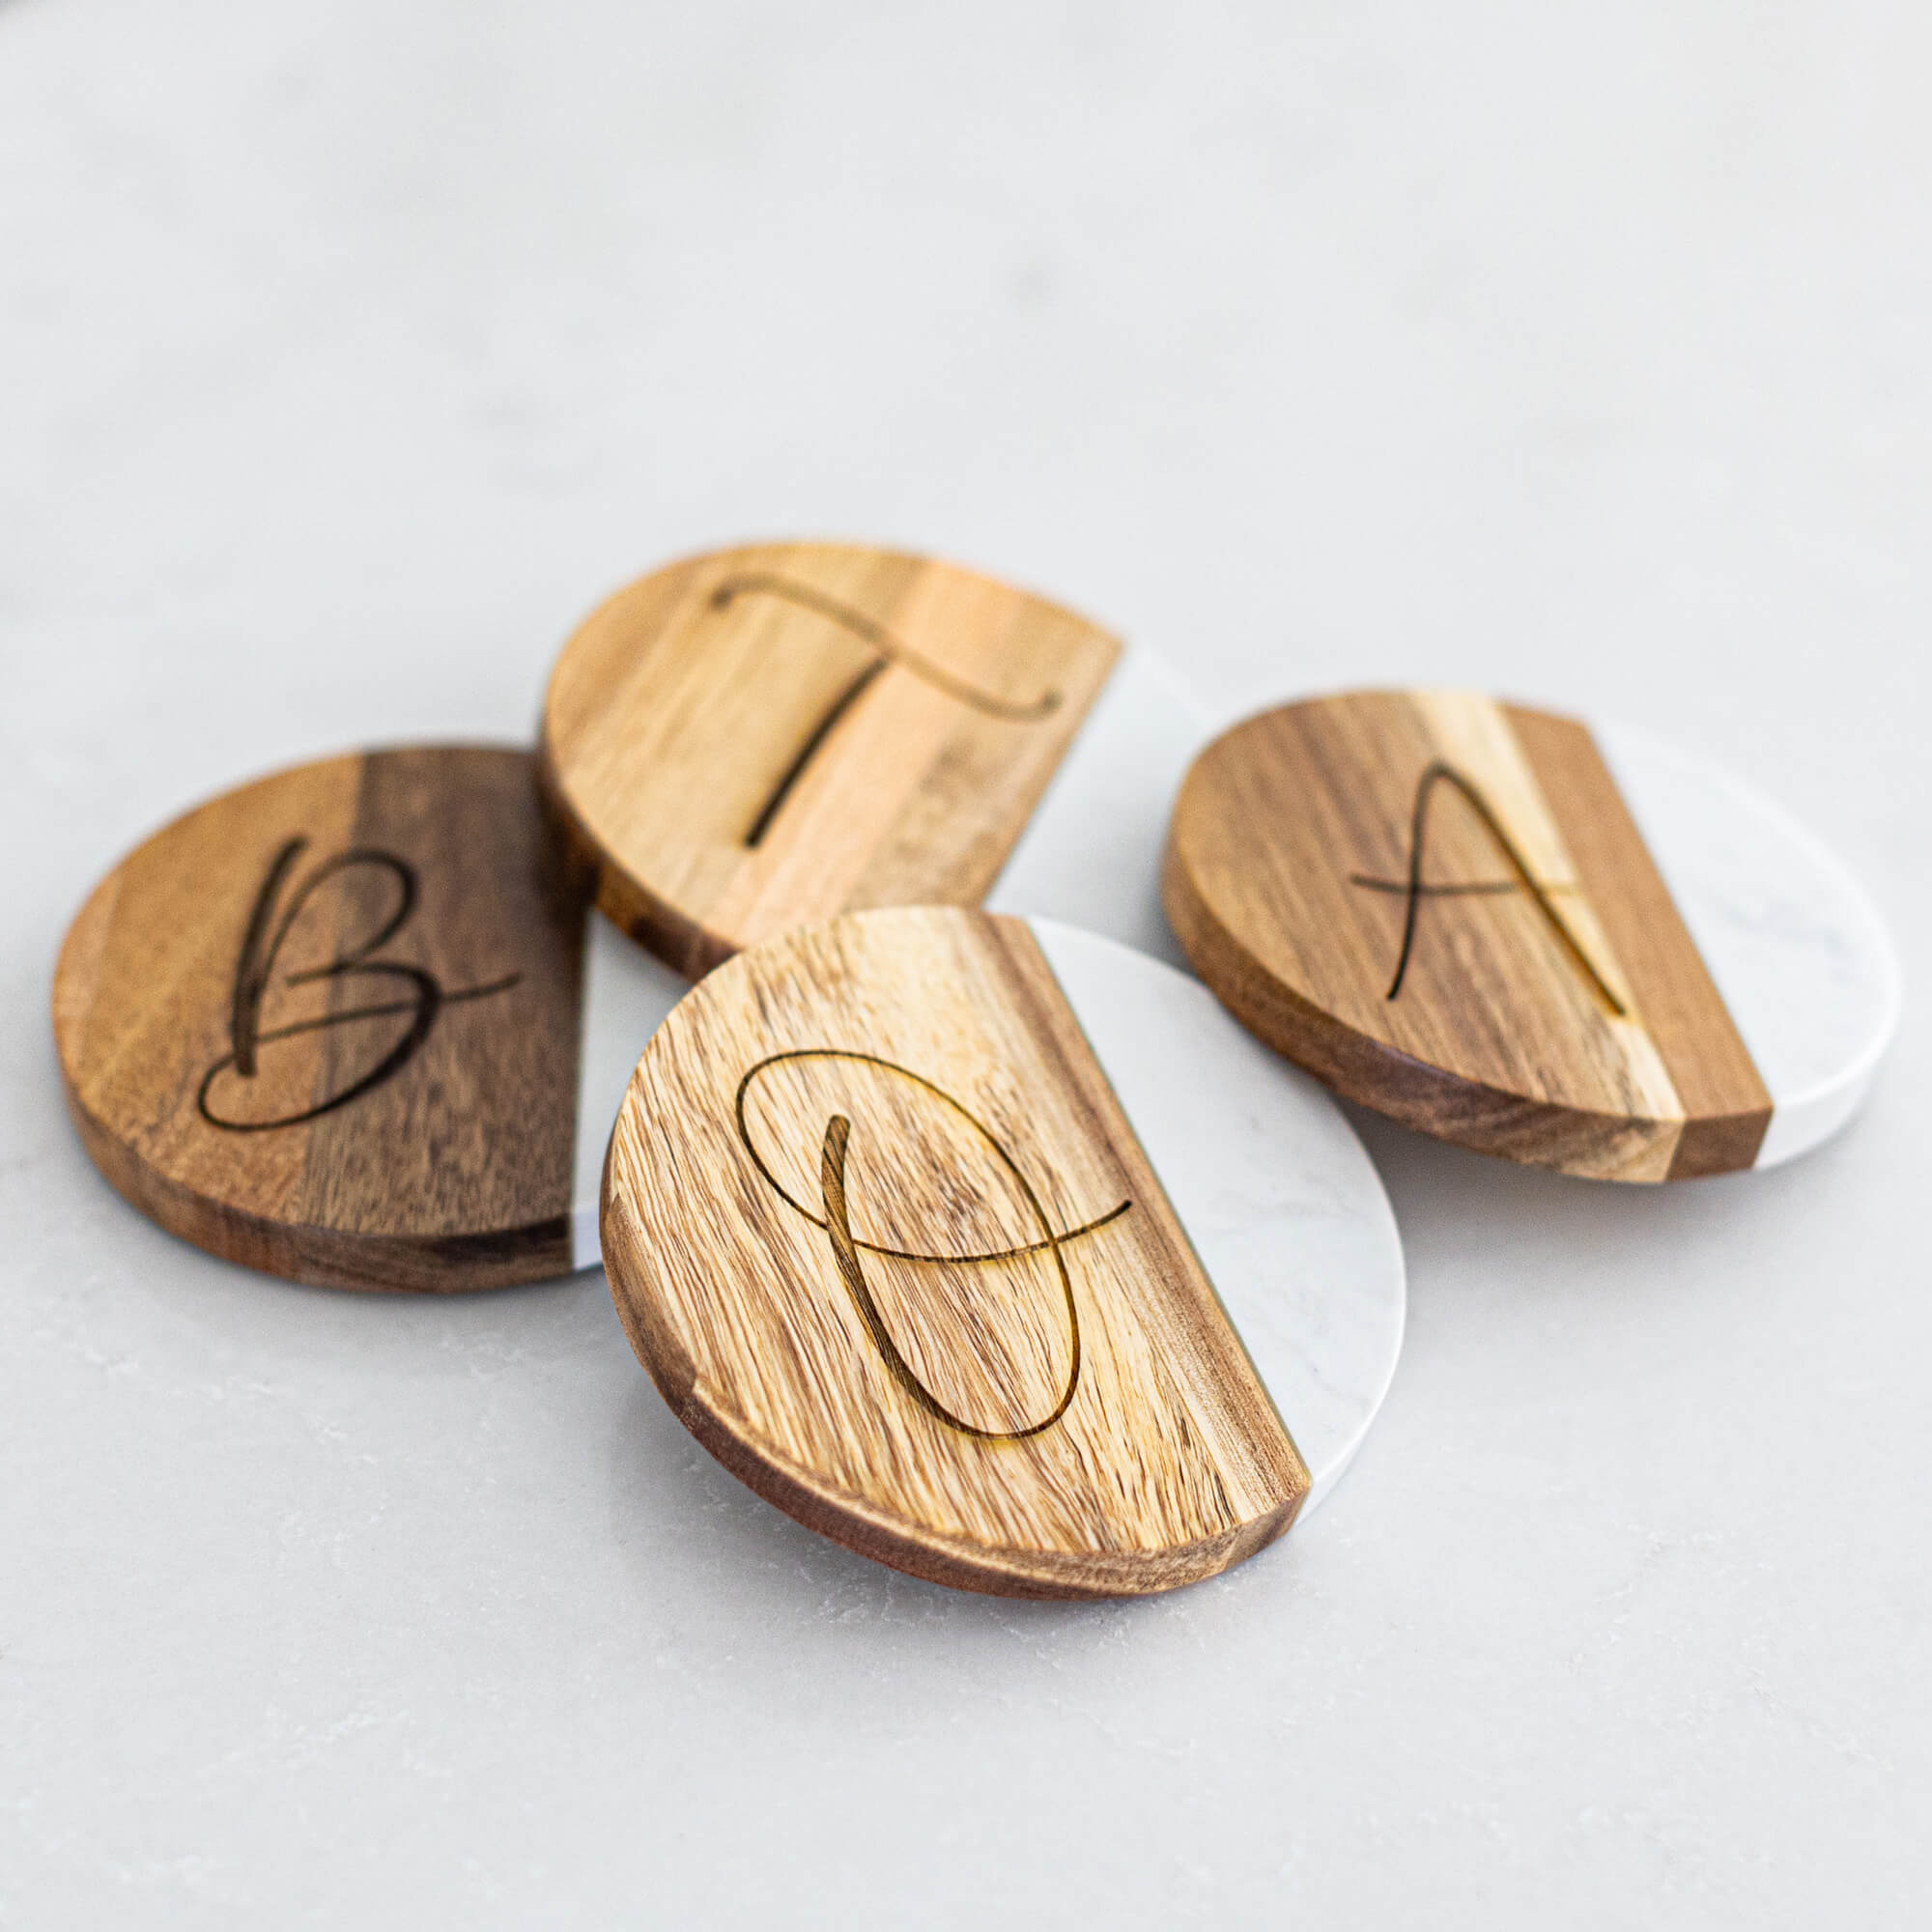 Marble and Acacia Wood Coasters with Initial - Set of 4 - Round